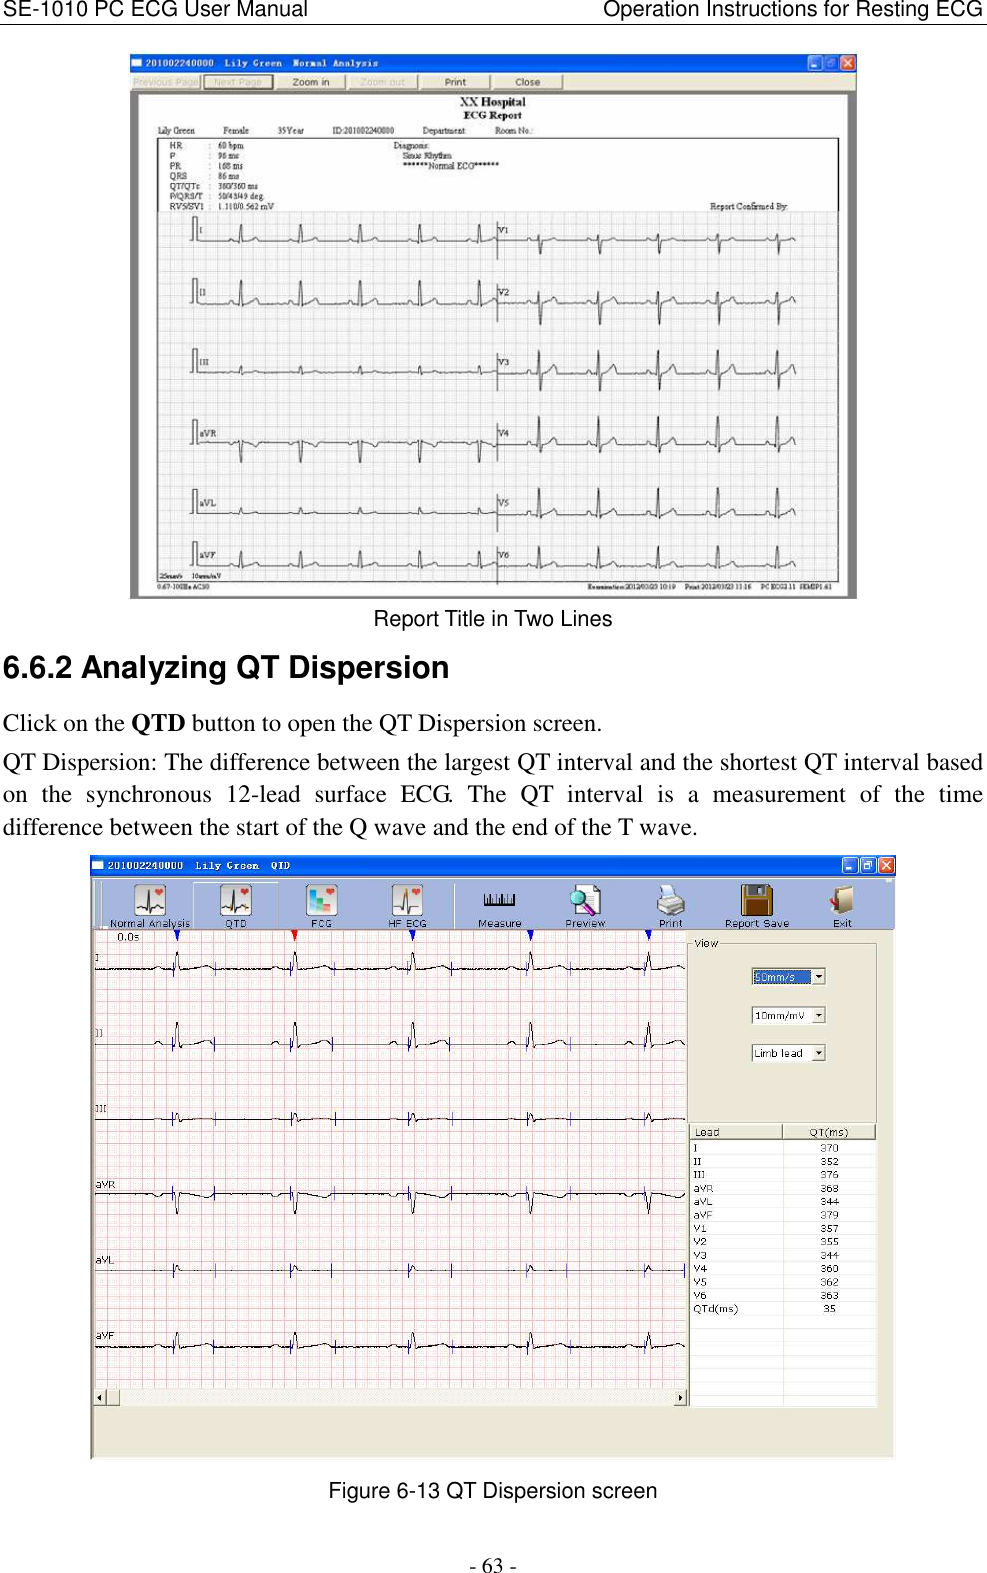 SE-1010 PC ECG User Manual                                                      Operation Instructions for Resting ECG - 63 -  Report Title in Two Lines 6.6.2 Analyzing QT Dispersion Click on the QTD button to open the QT Dispersion screen. QT Dispersion: The difference between the largest QT interval and the shortest QT interval based on  the  synchronous  12-lead  surface  ECG.  The  QT  interval  is  a  measurement  of  the  time difference between the start of the Q wave and the end of the T wave.  Figure 6-13 QT Dispersion screen 